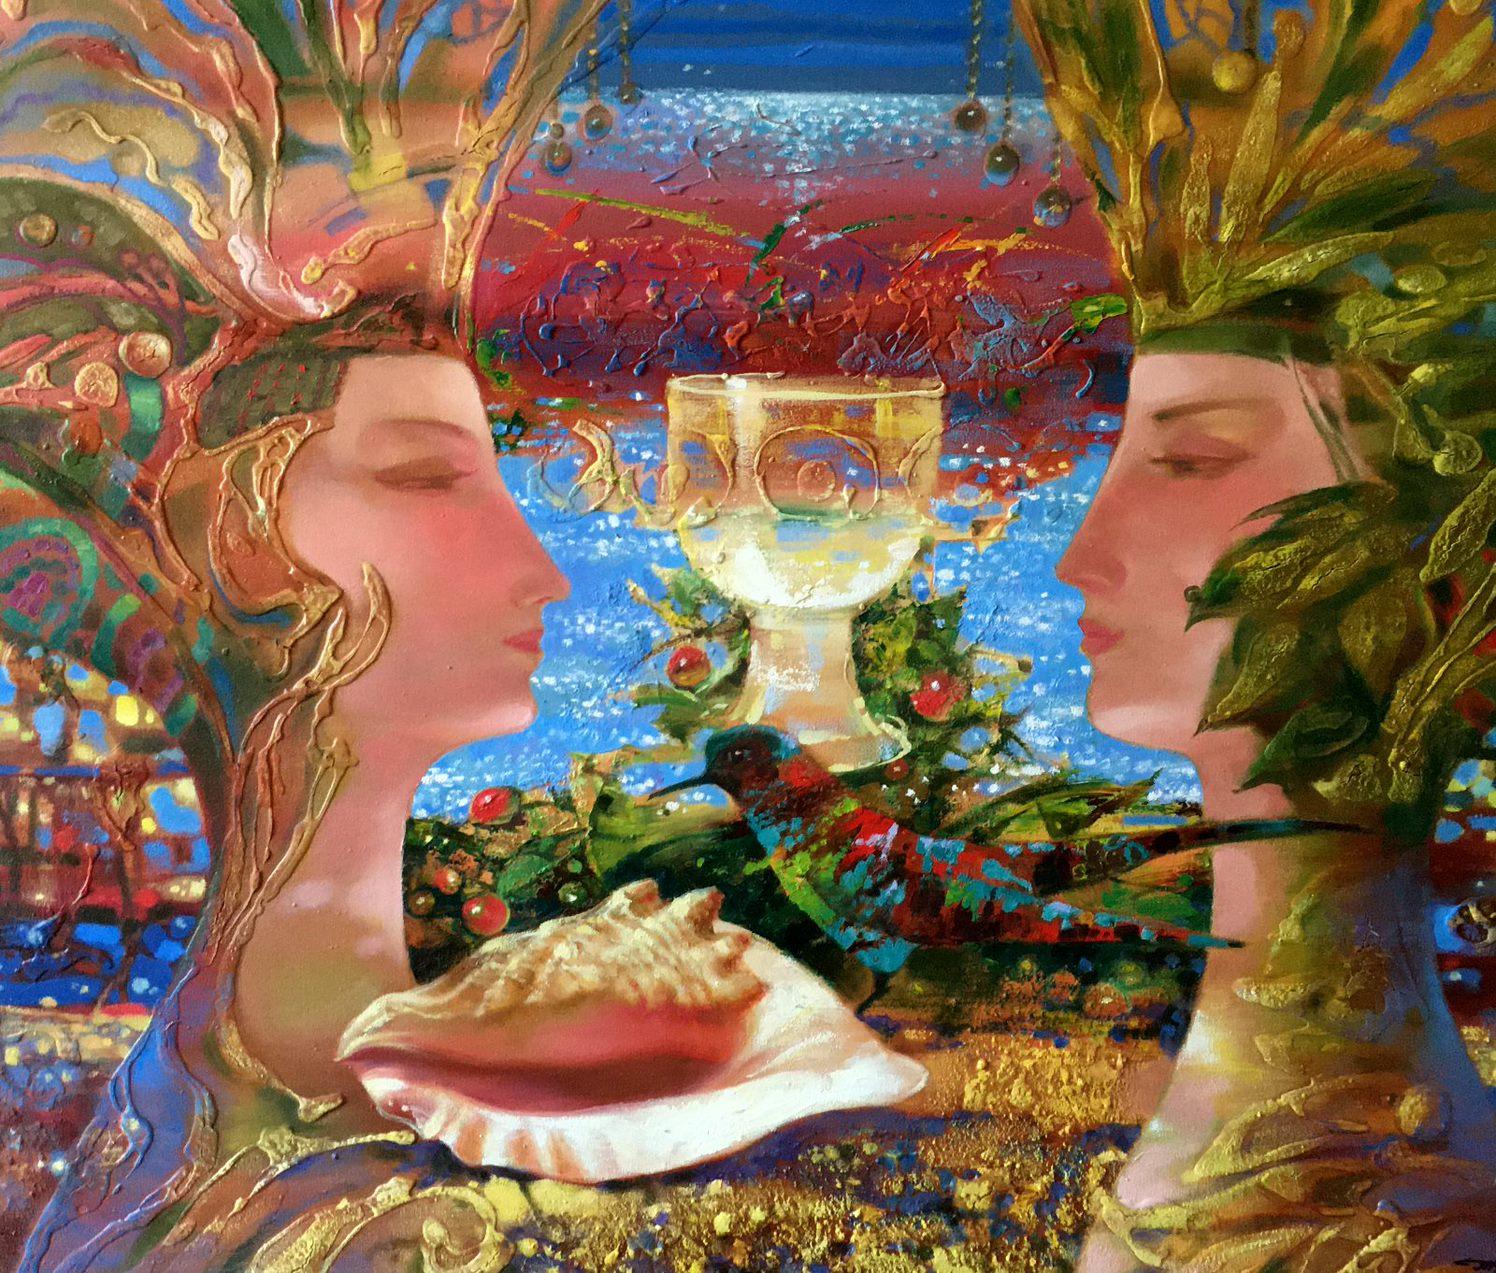 Flora and Fauna, Portrait, Surrealism, Original oil Painting, Ready to Hang